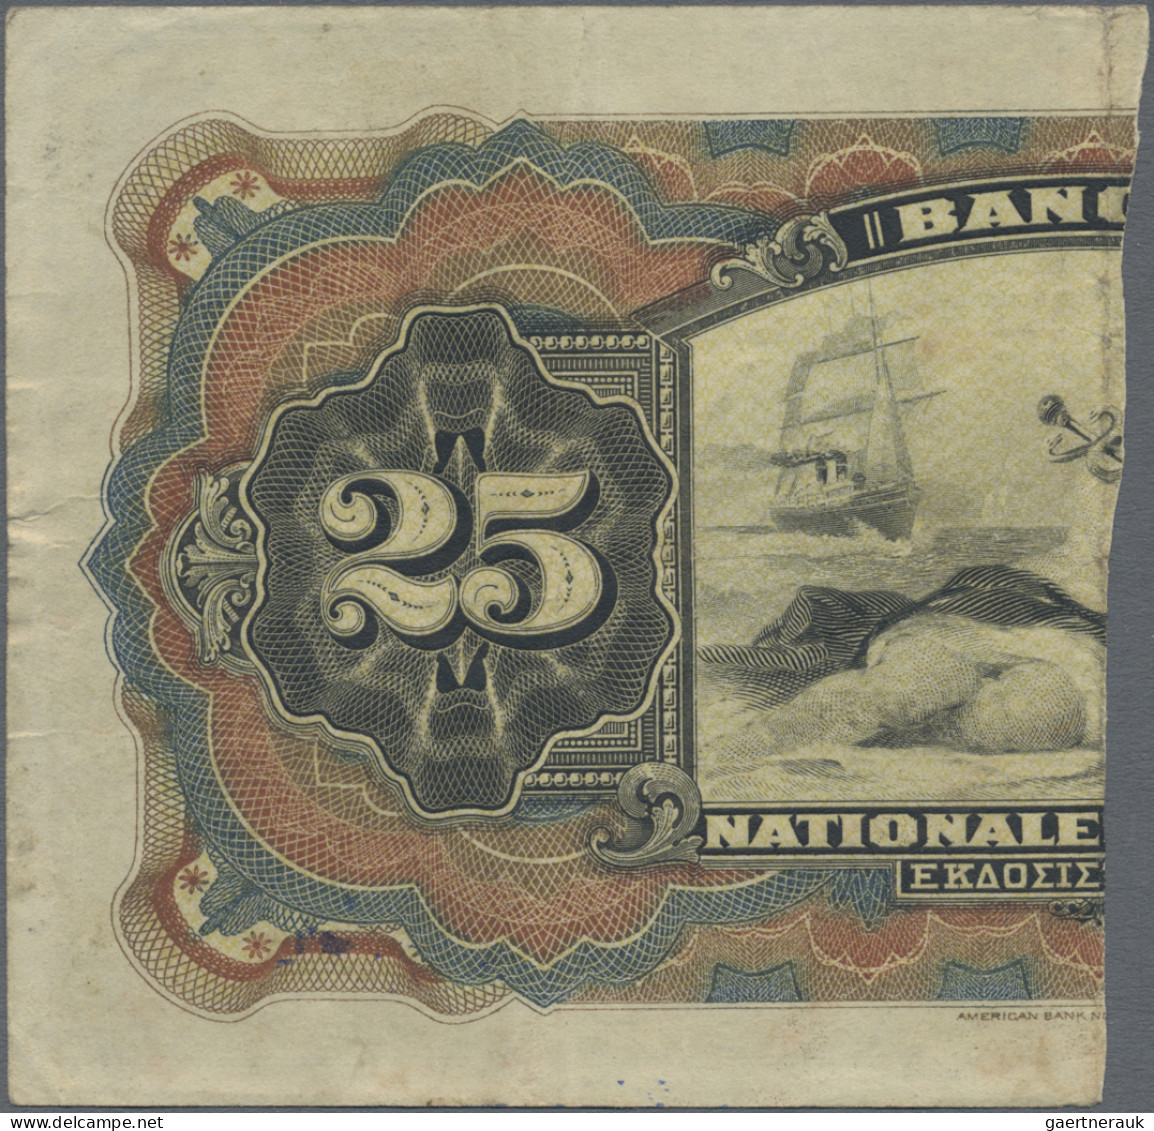 Greece: National Bank of Greece, set with 4 "Half-Notes", year of cutting 1922,